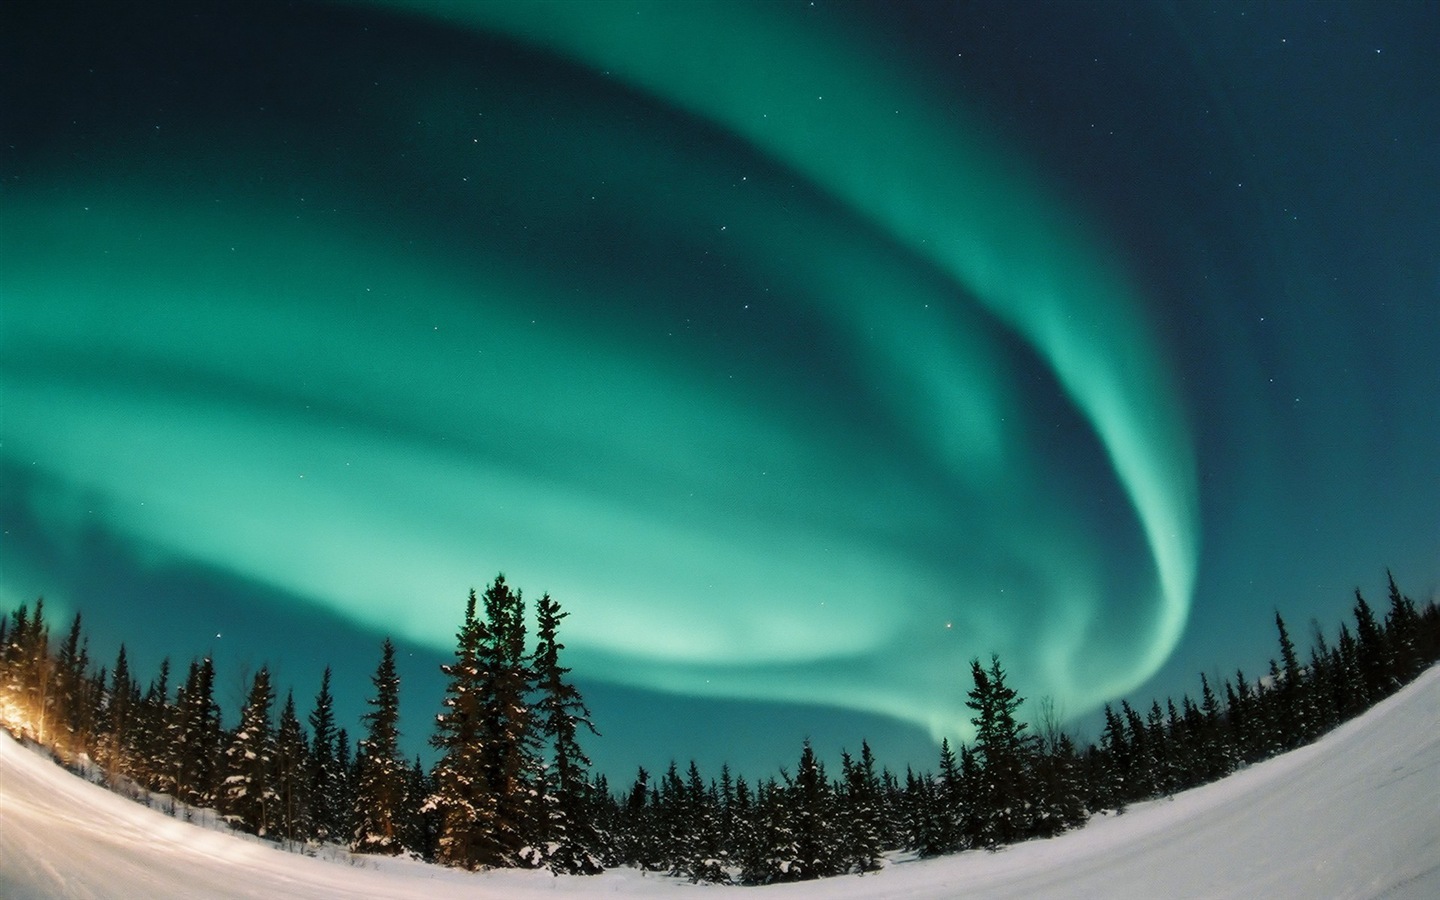 Natural wonders of the Northern Lights HD Wallpaper (1) #12 - 1440x900